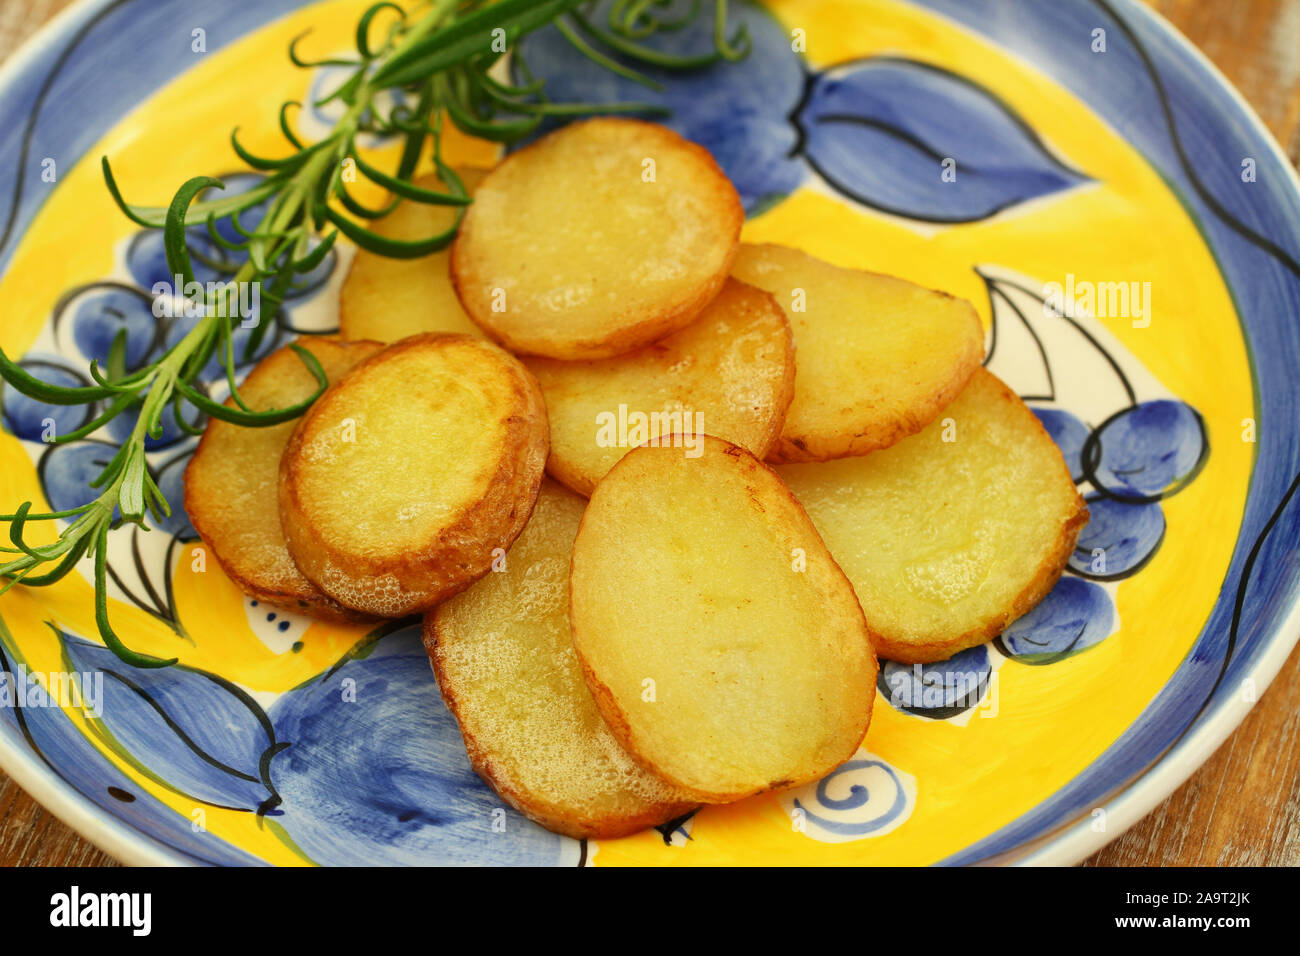 Slices of fried potatoes with fresh rosemary on vintage plate Stock Photo